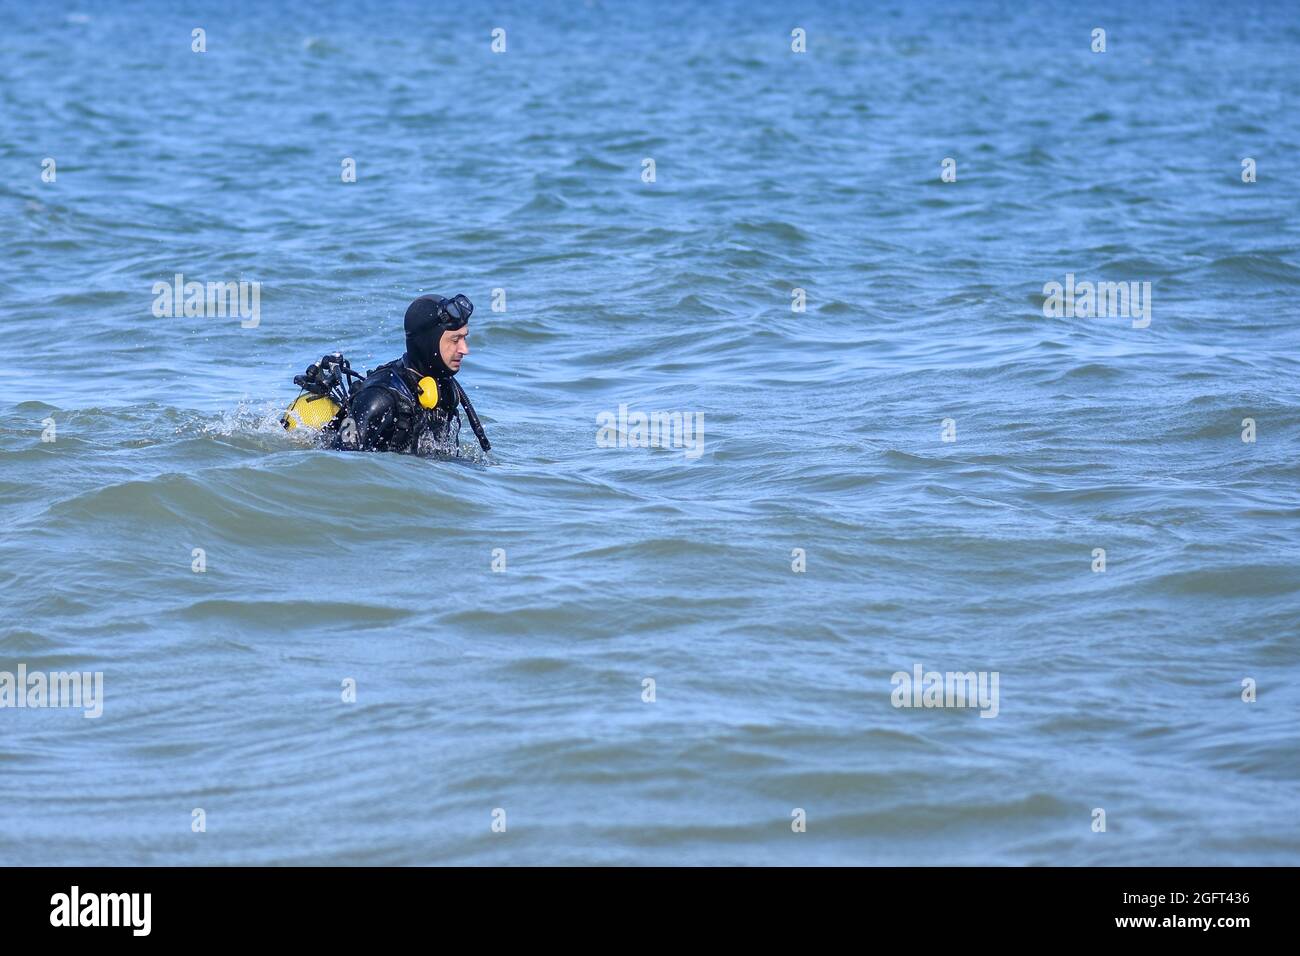 a man in a diving suit enters the water. Editorial Stock Photo